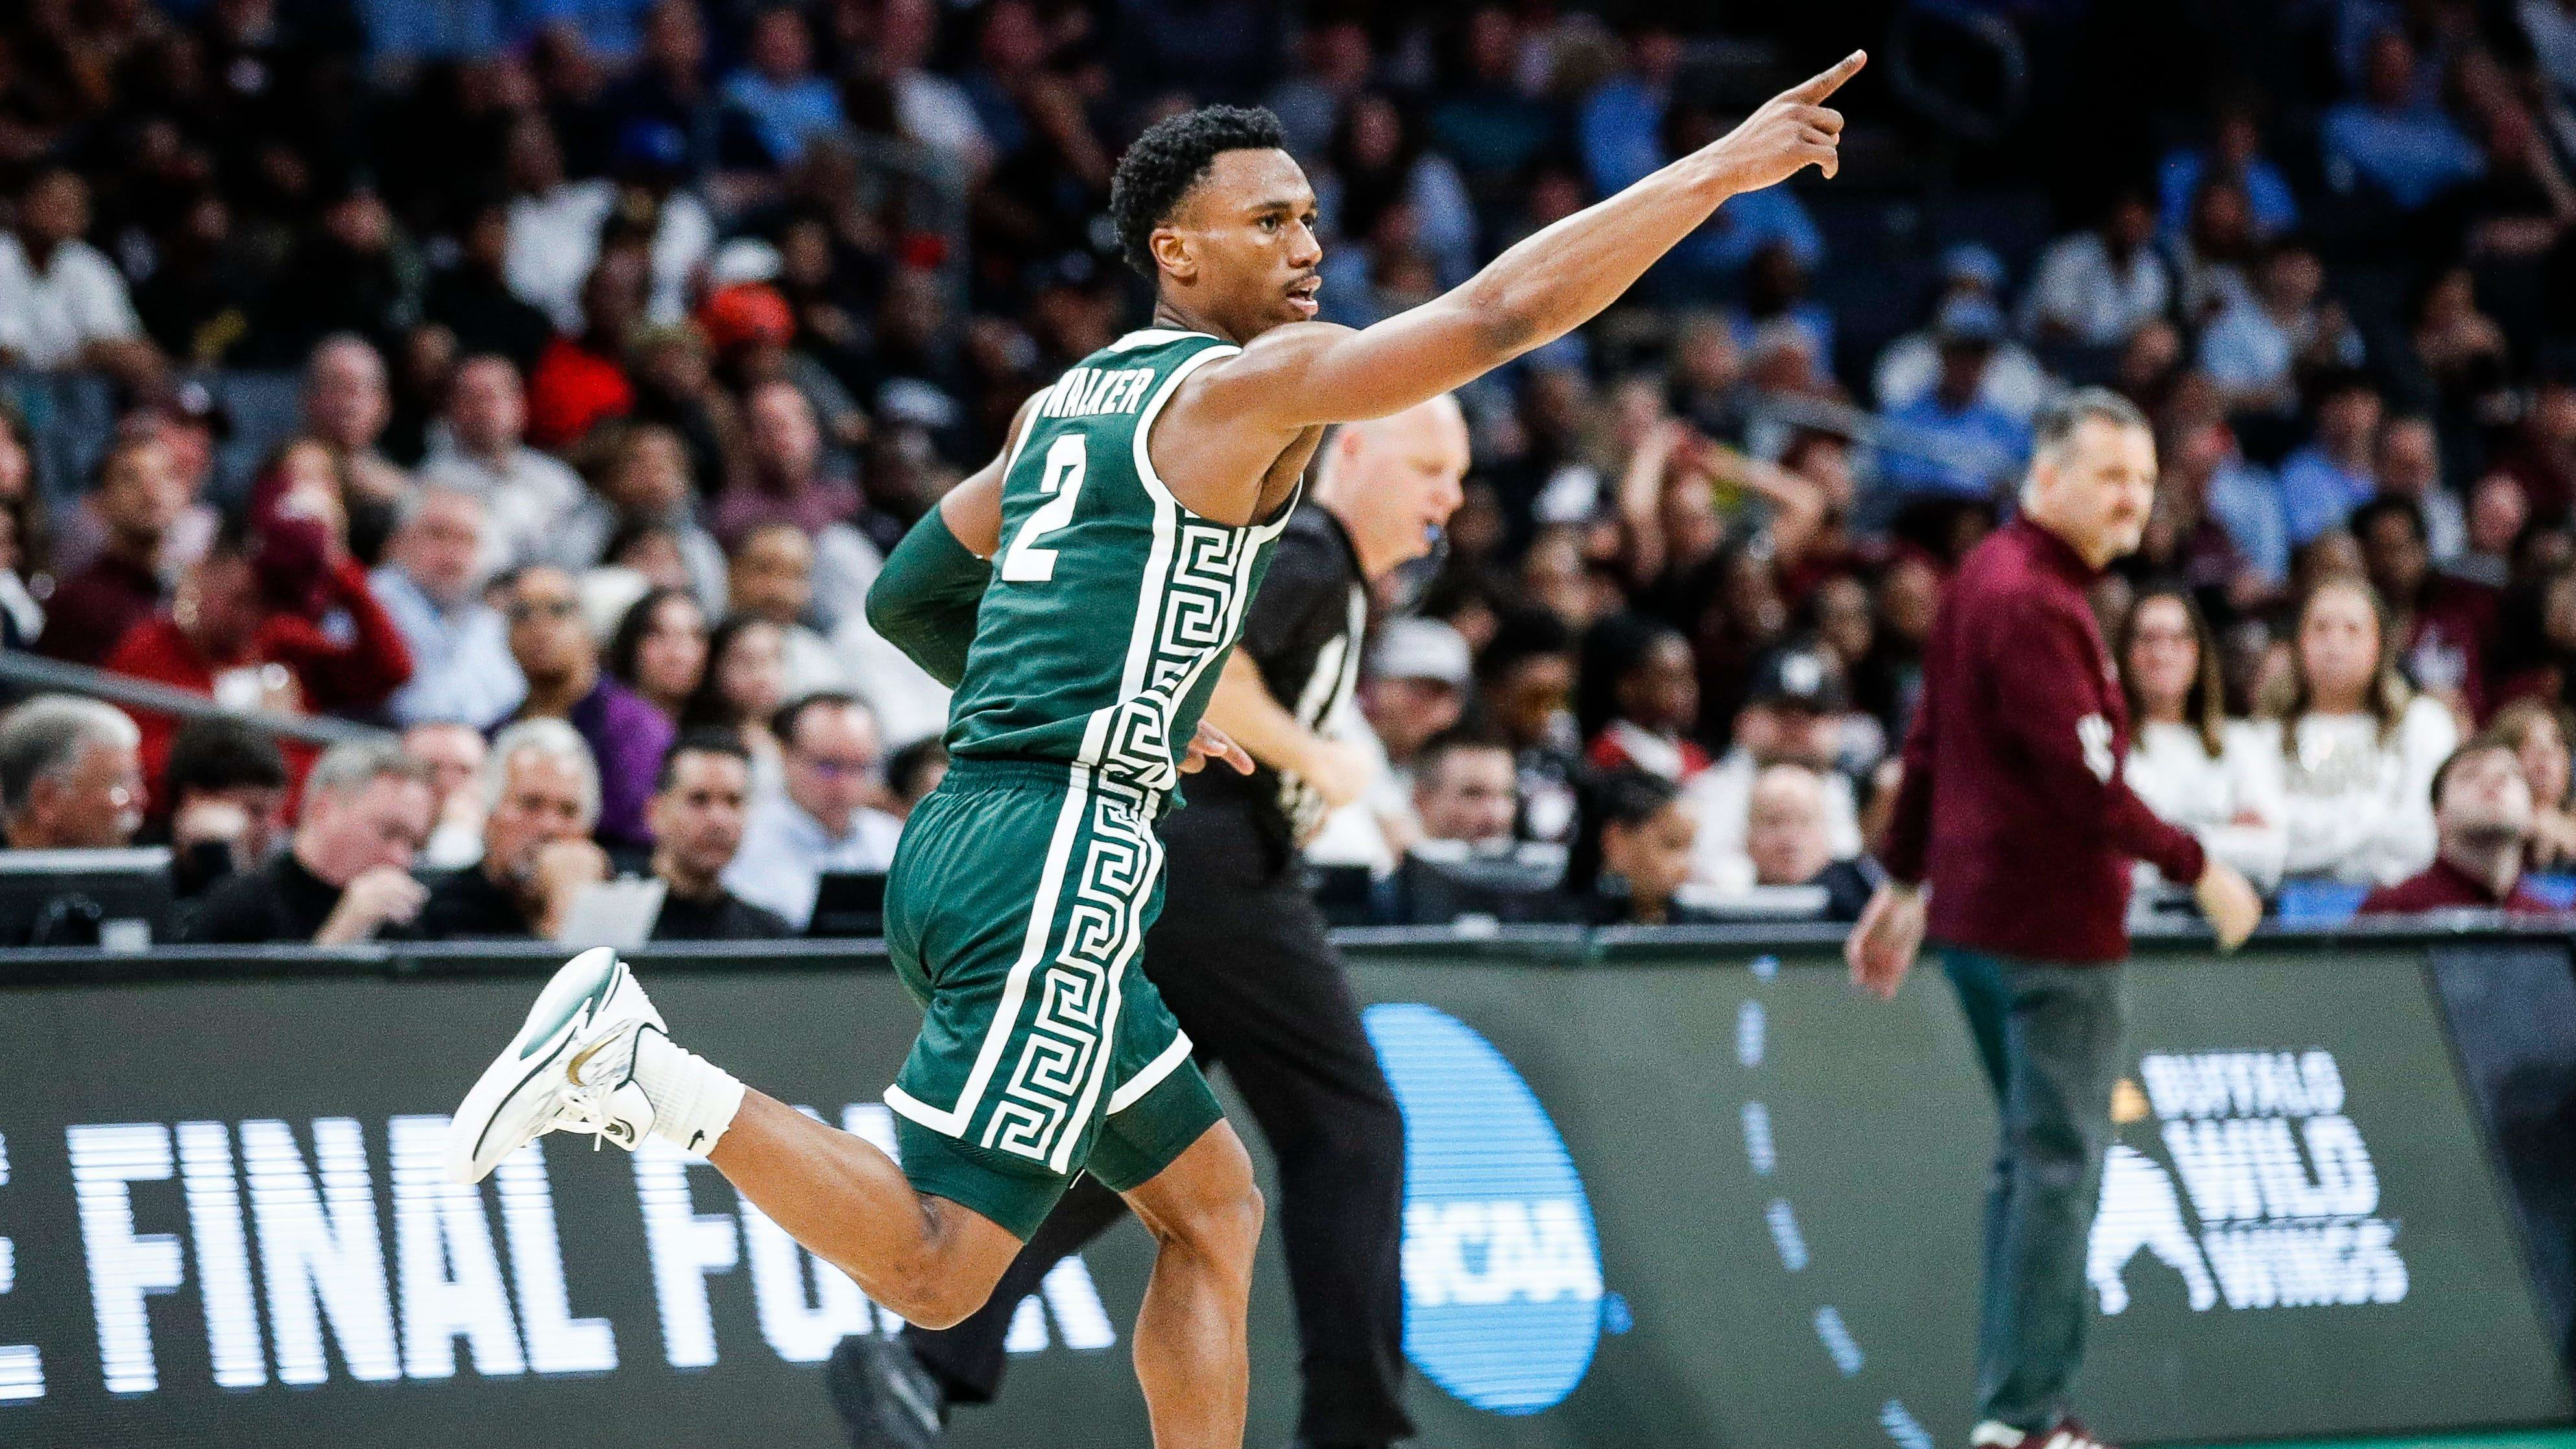 Michigan State's Tyson Walker during the Spartans' NCAA Tournament first round action against the Mississippi State Bulldogs